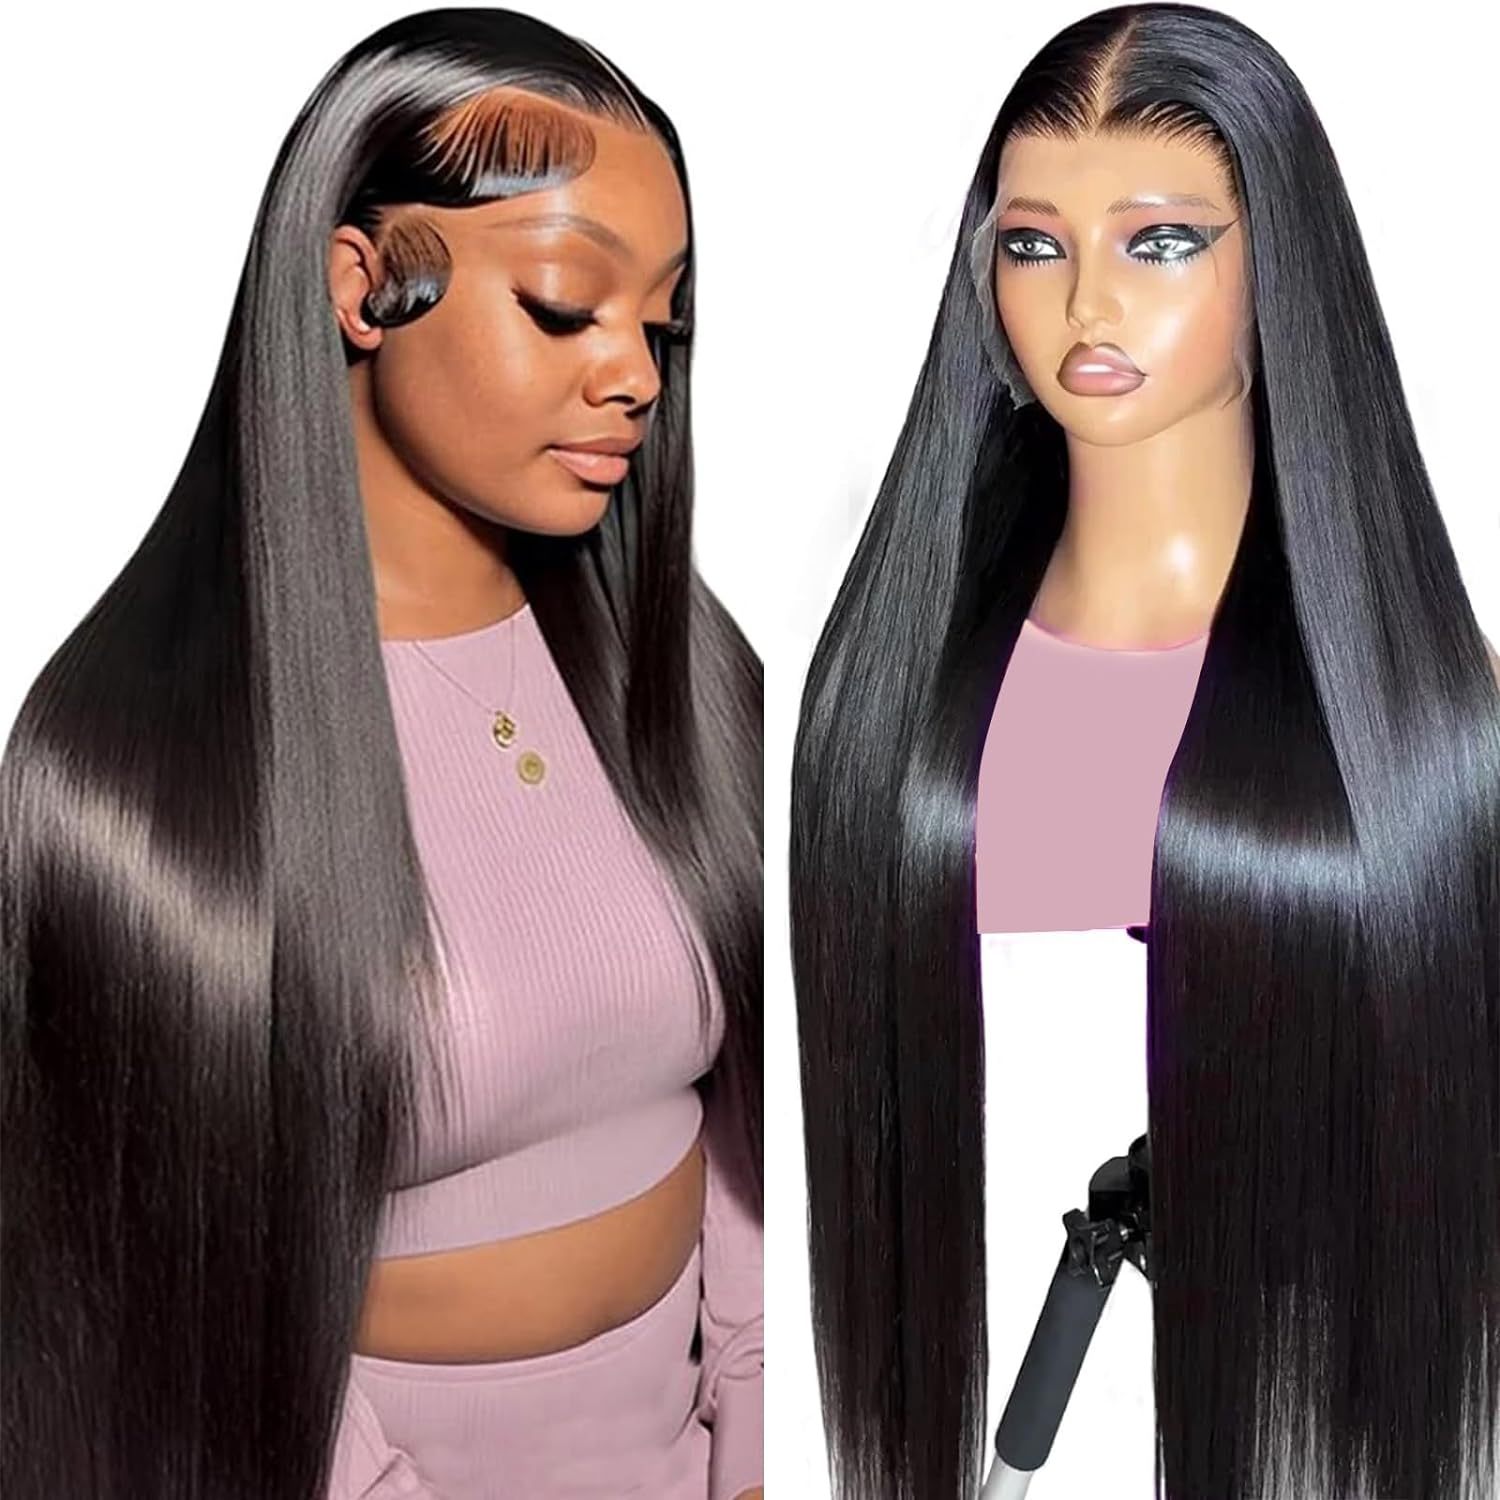 

250% Density Straight Lace Front Wig Transparent Hd 13x6 Straight Brazilian Virgin Human Hair Lace Frontal Wigs Pre Plucked With Baby Hair Black For Women 34inch